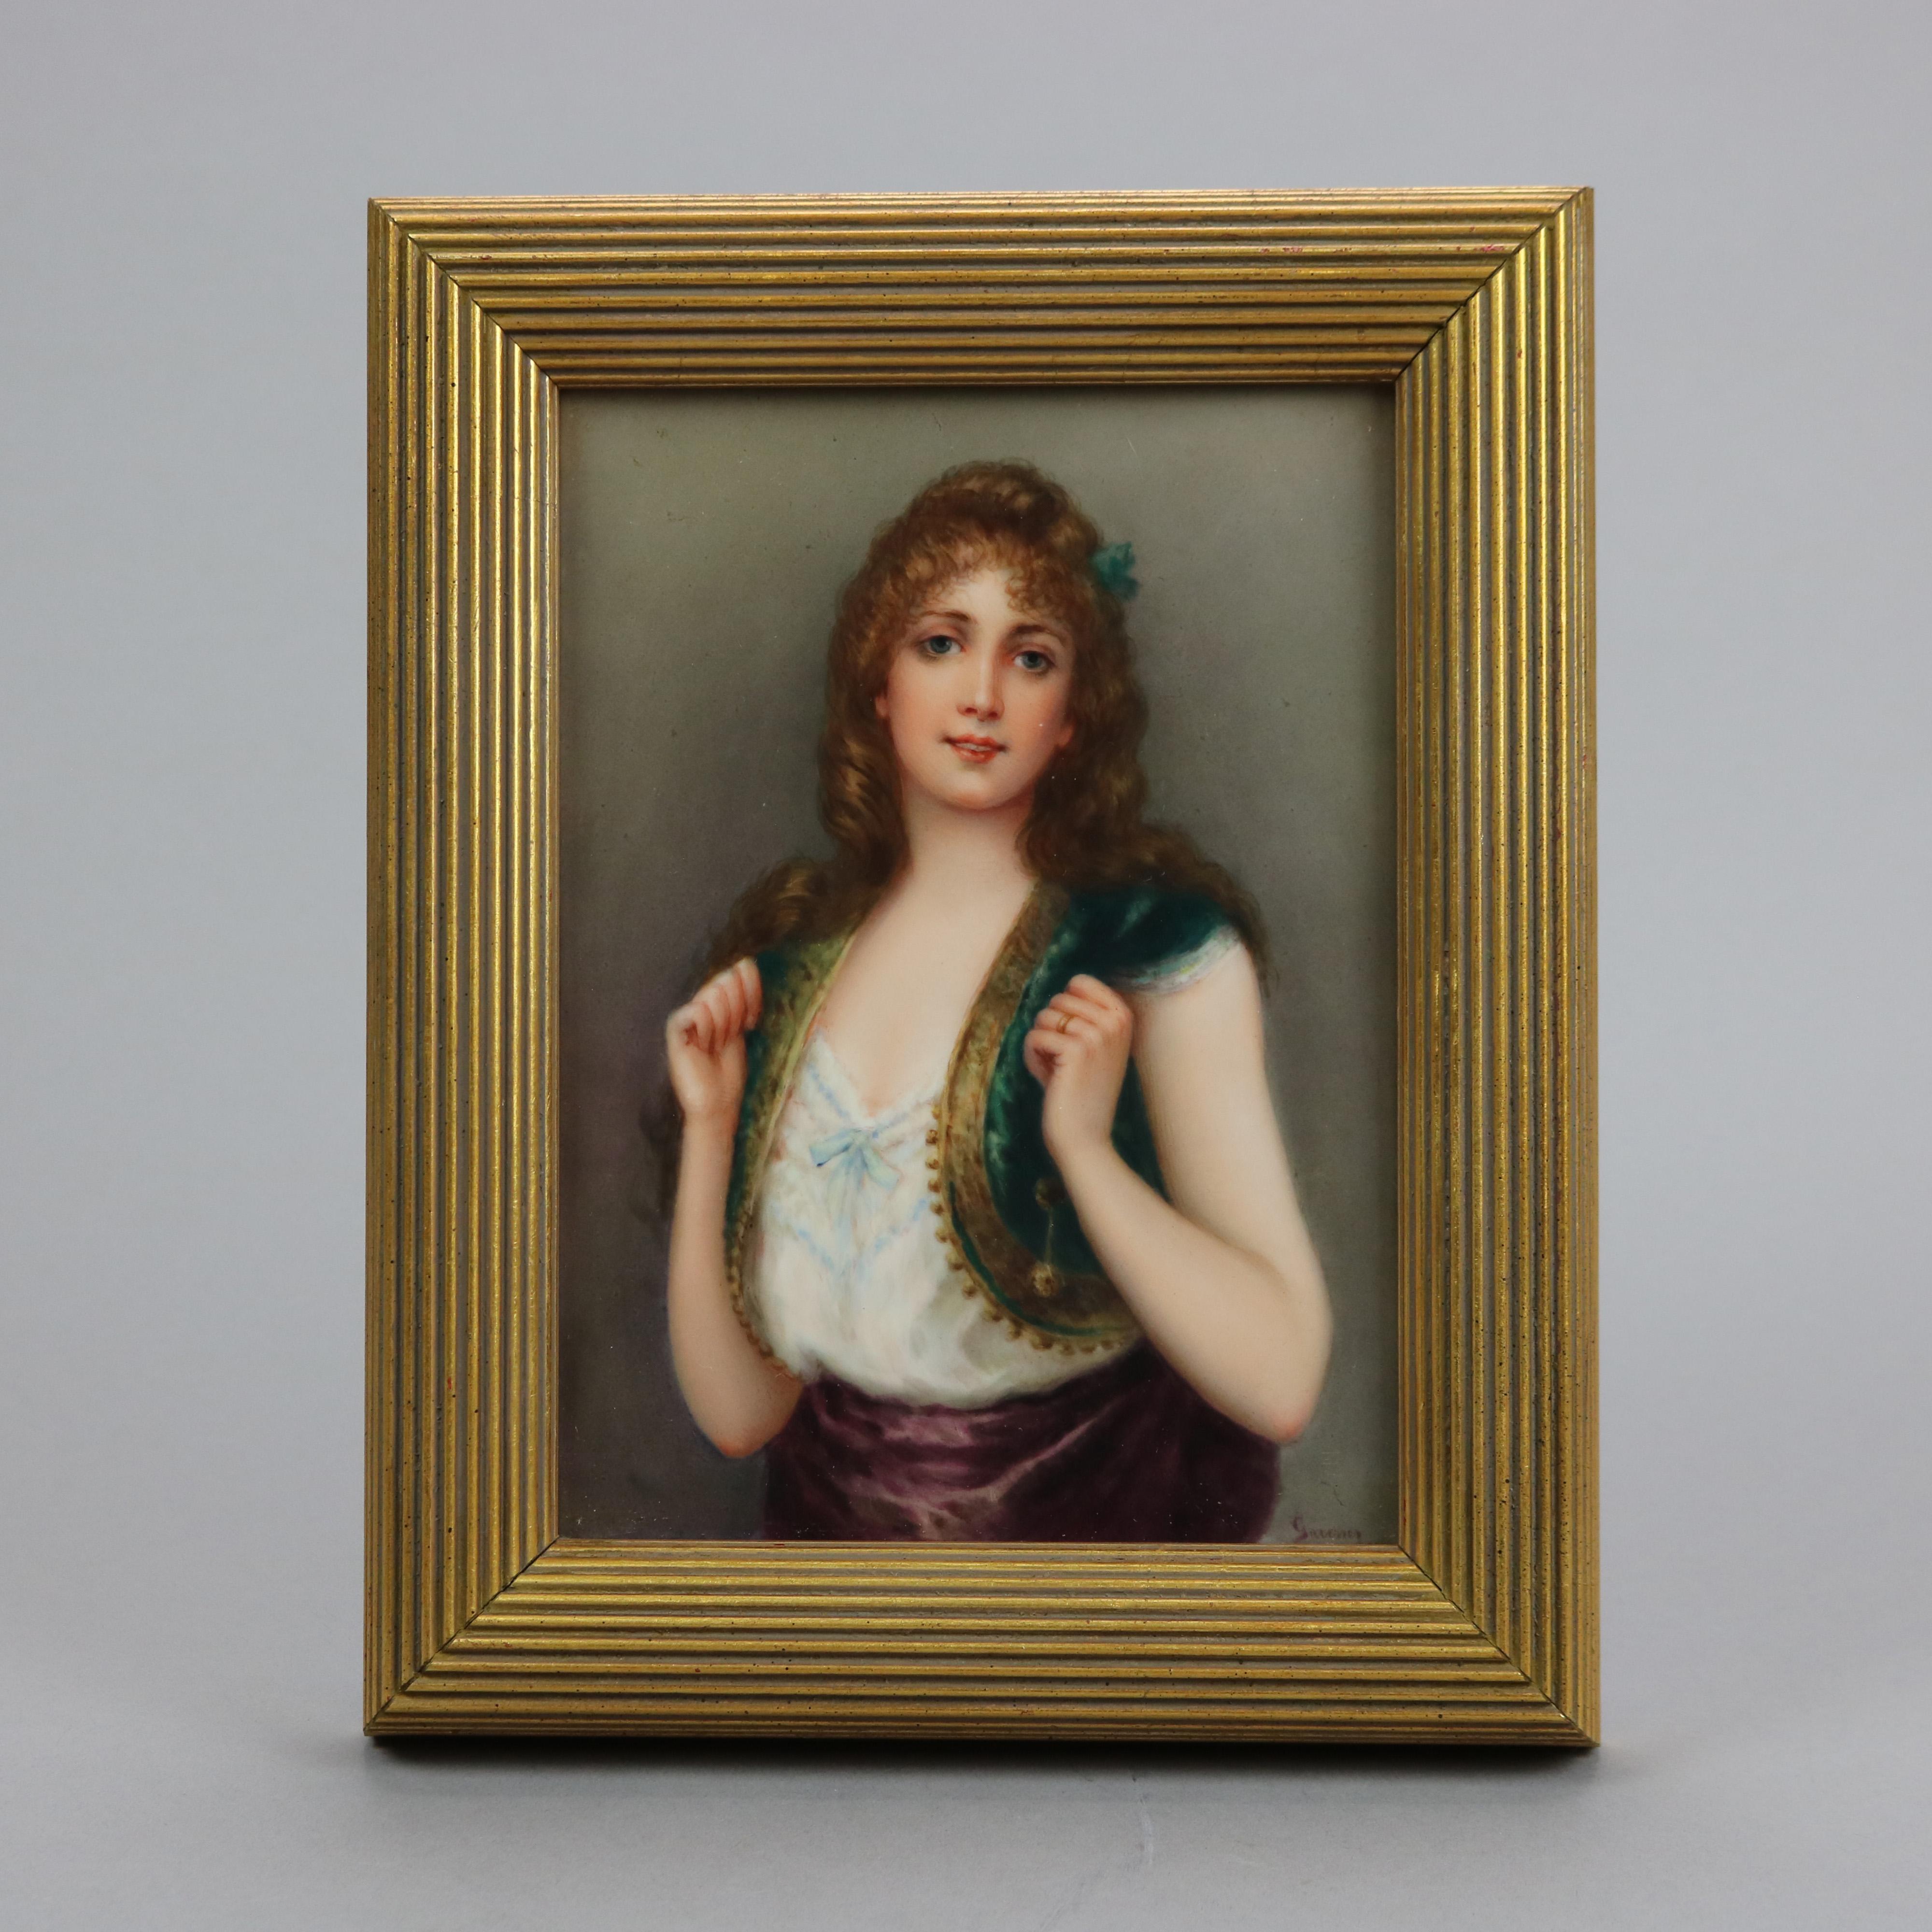 An antique German painting on porcelain offers portrait of a young woman, artist signed lower right, labeled and marked en verso as photographed, seated in reeded giltwood frame, dated 1847.

Measures - 11.25''H X 9''W X 1.75''D.

Catalogue Note: